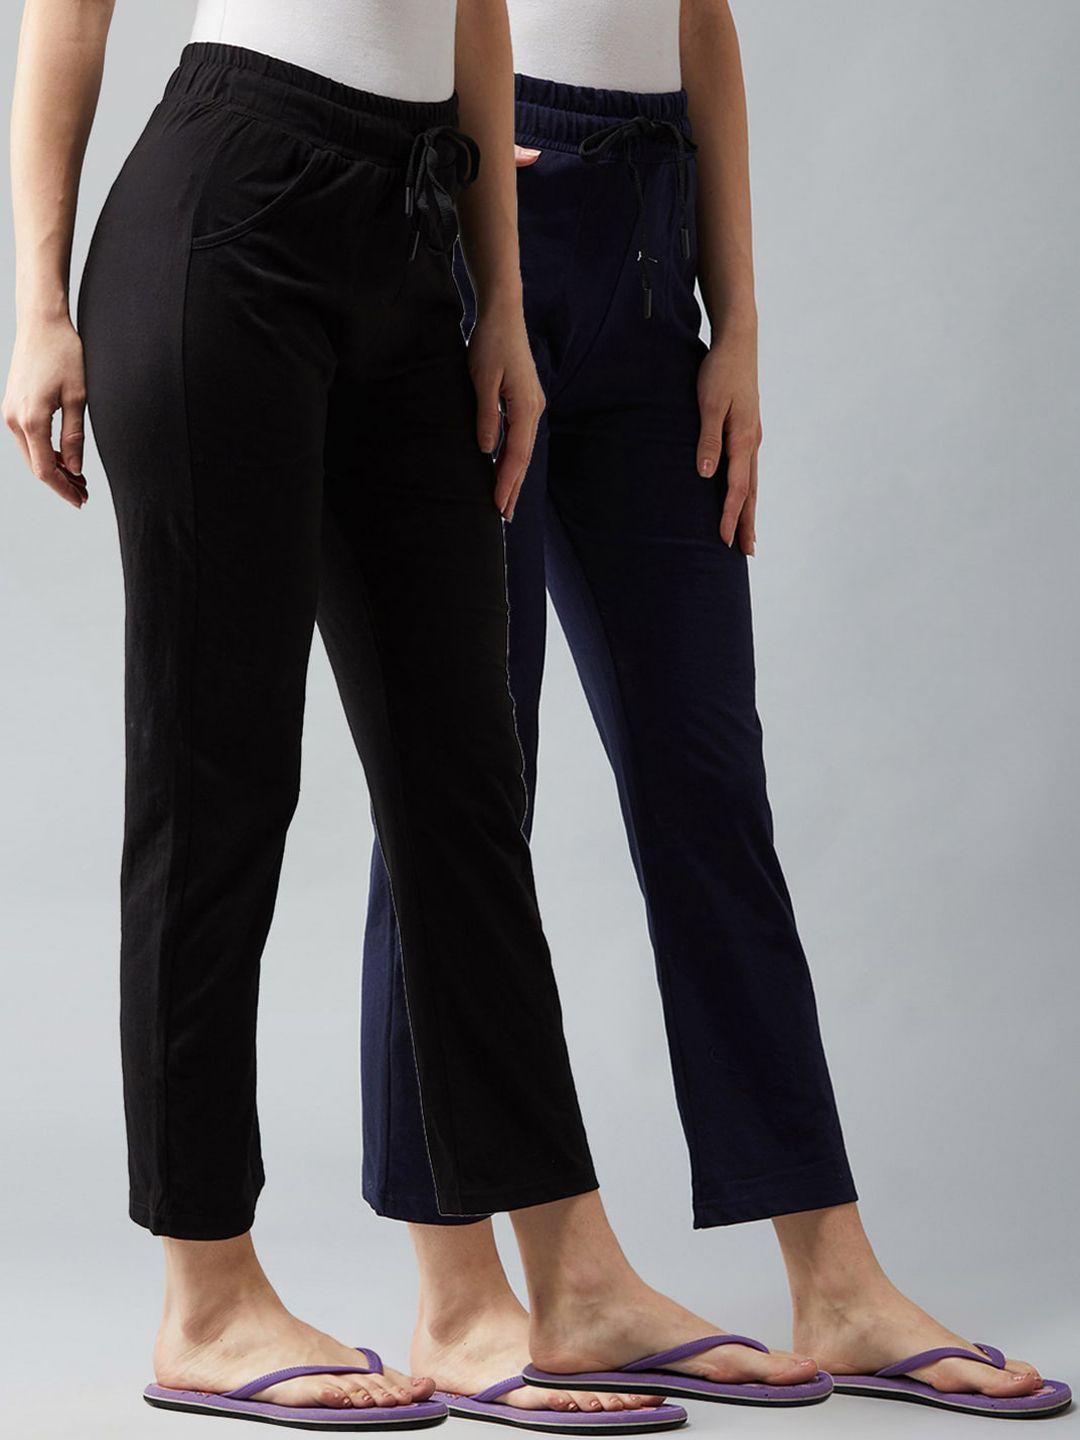 blinkin women pack of 2 navy blue & black relaxed-fit track pants